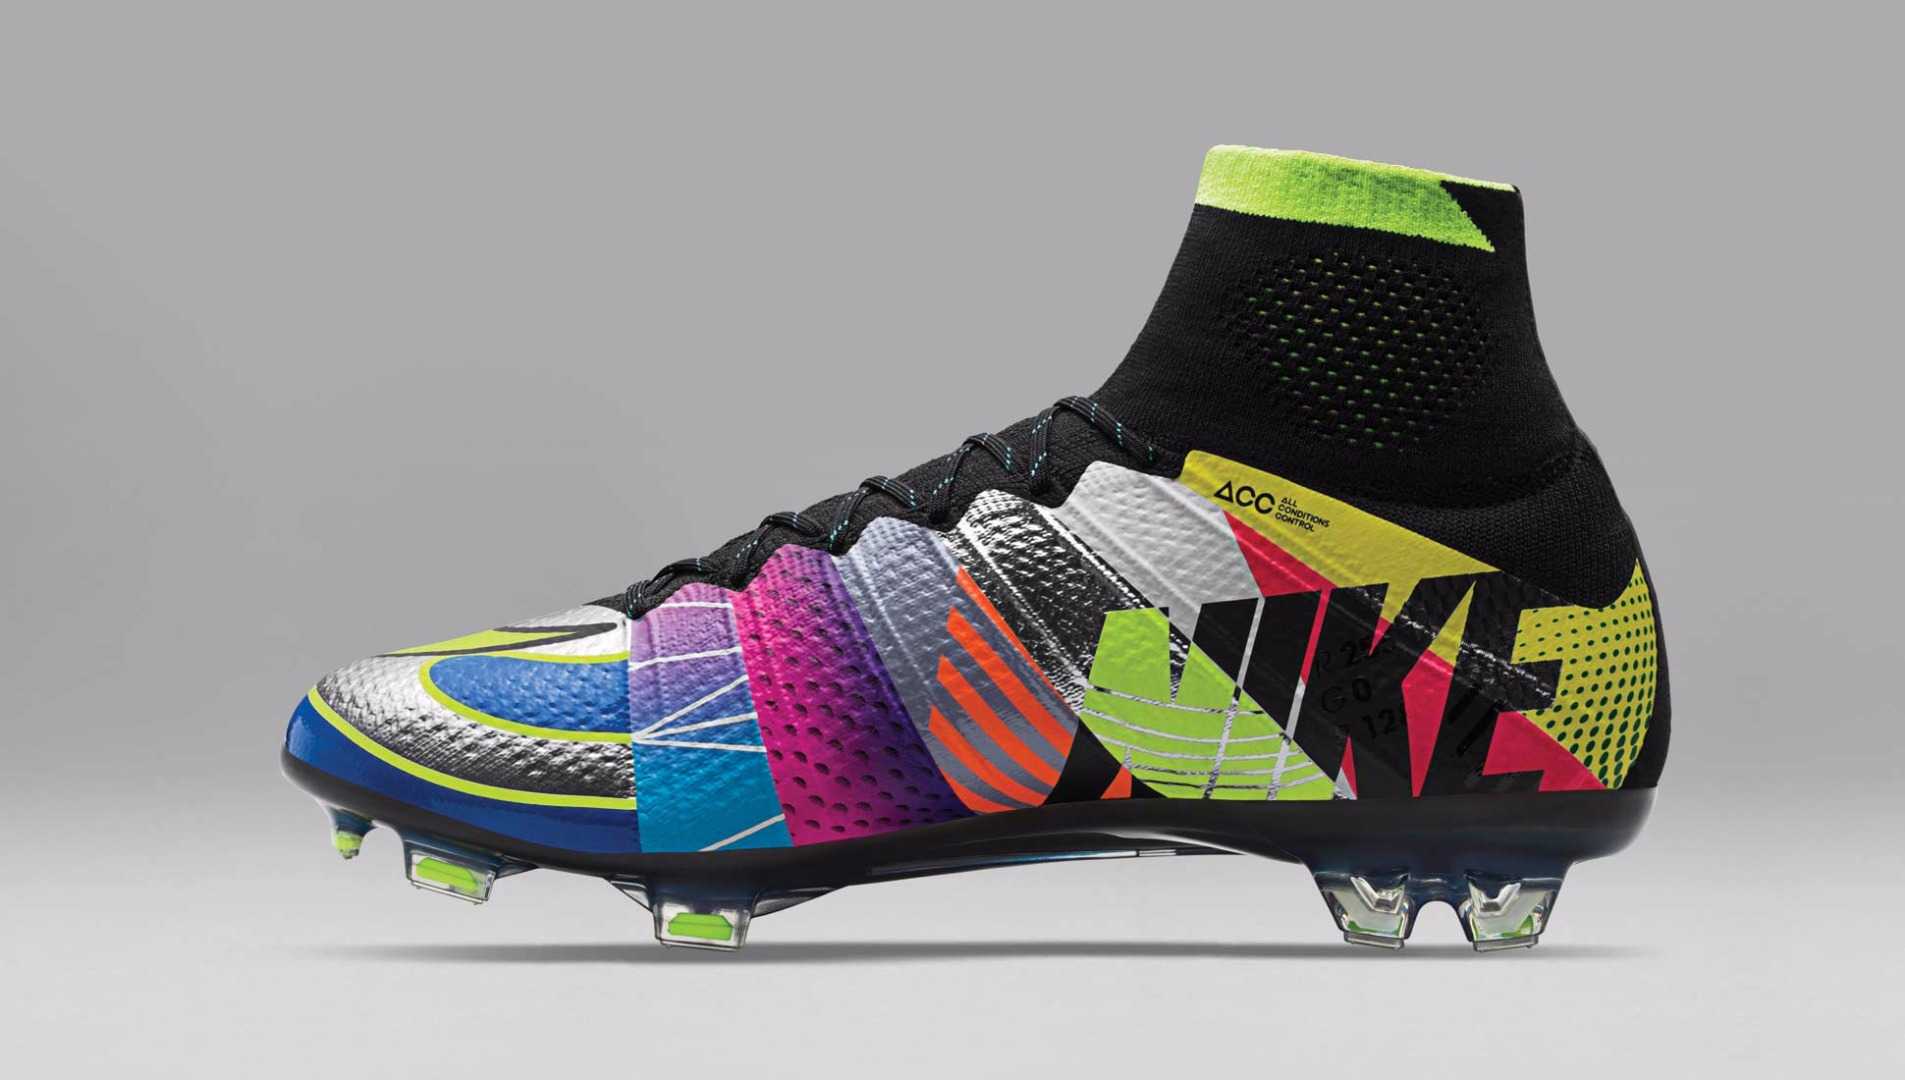 Nike mercurial superfly 360 review: the best speed boot